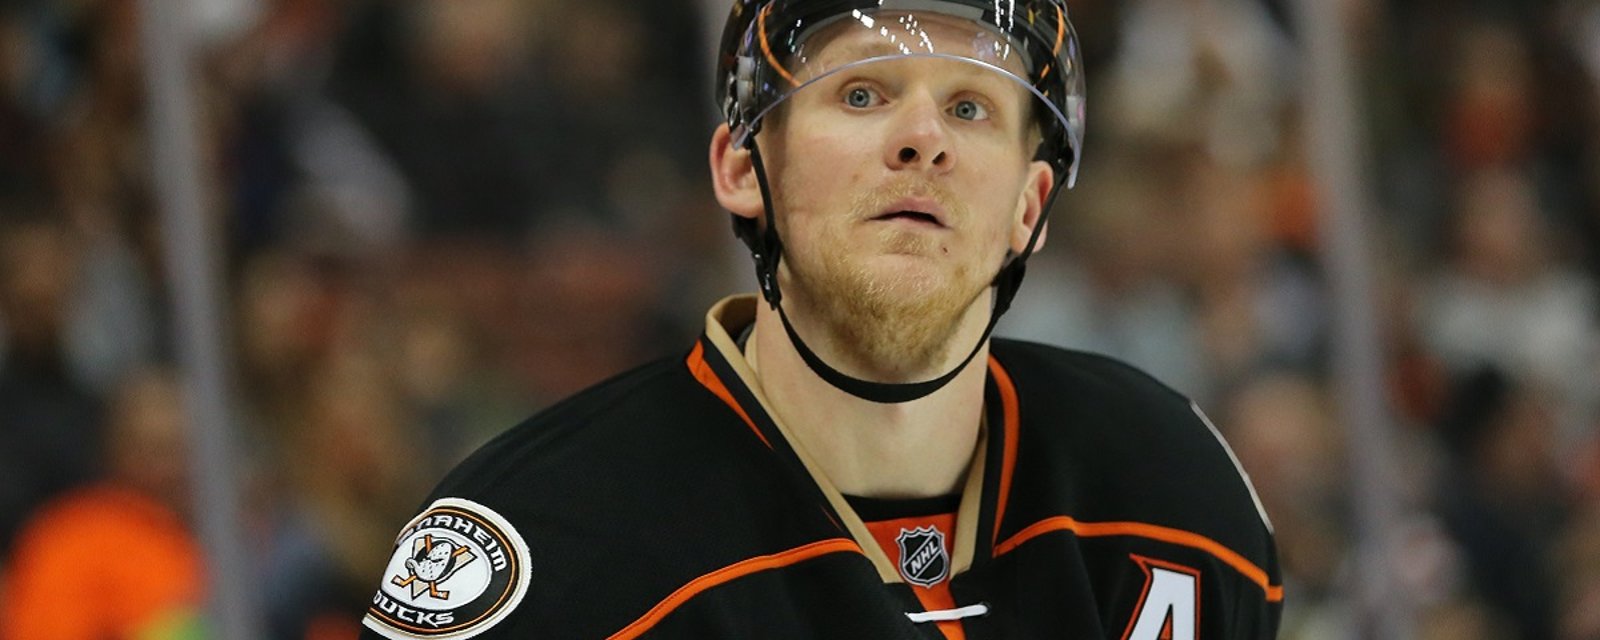 Breaking: Corey Perry suffers a nasty looking injury. 